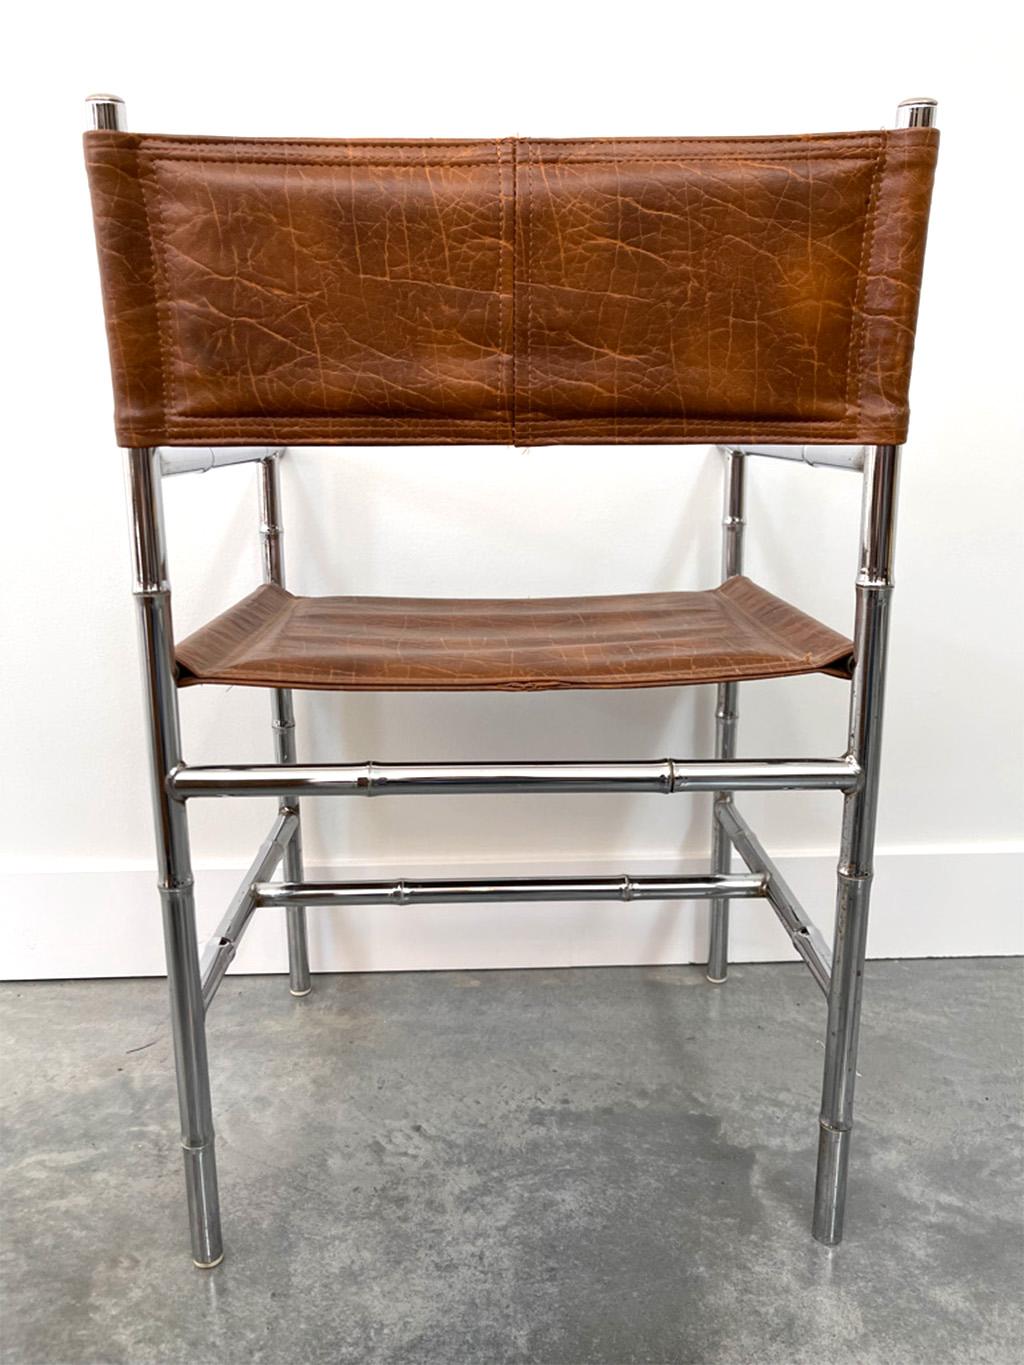 20th Century Mid-Century Modern Chrome Bamboo Table with Glass Top and Four Chairs For Sale